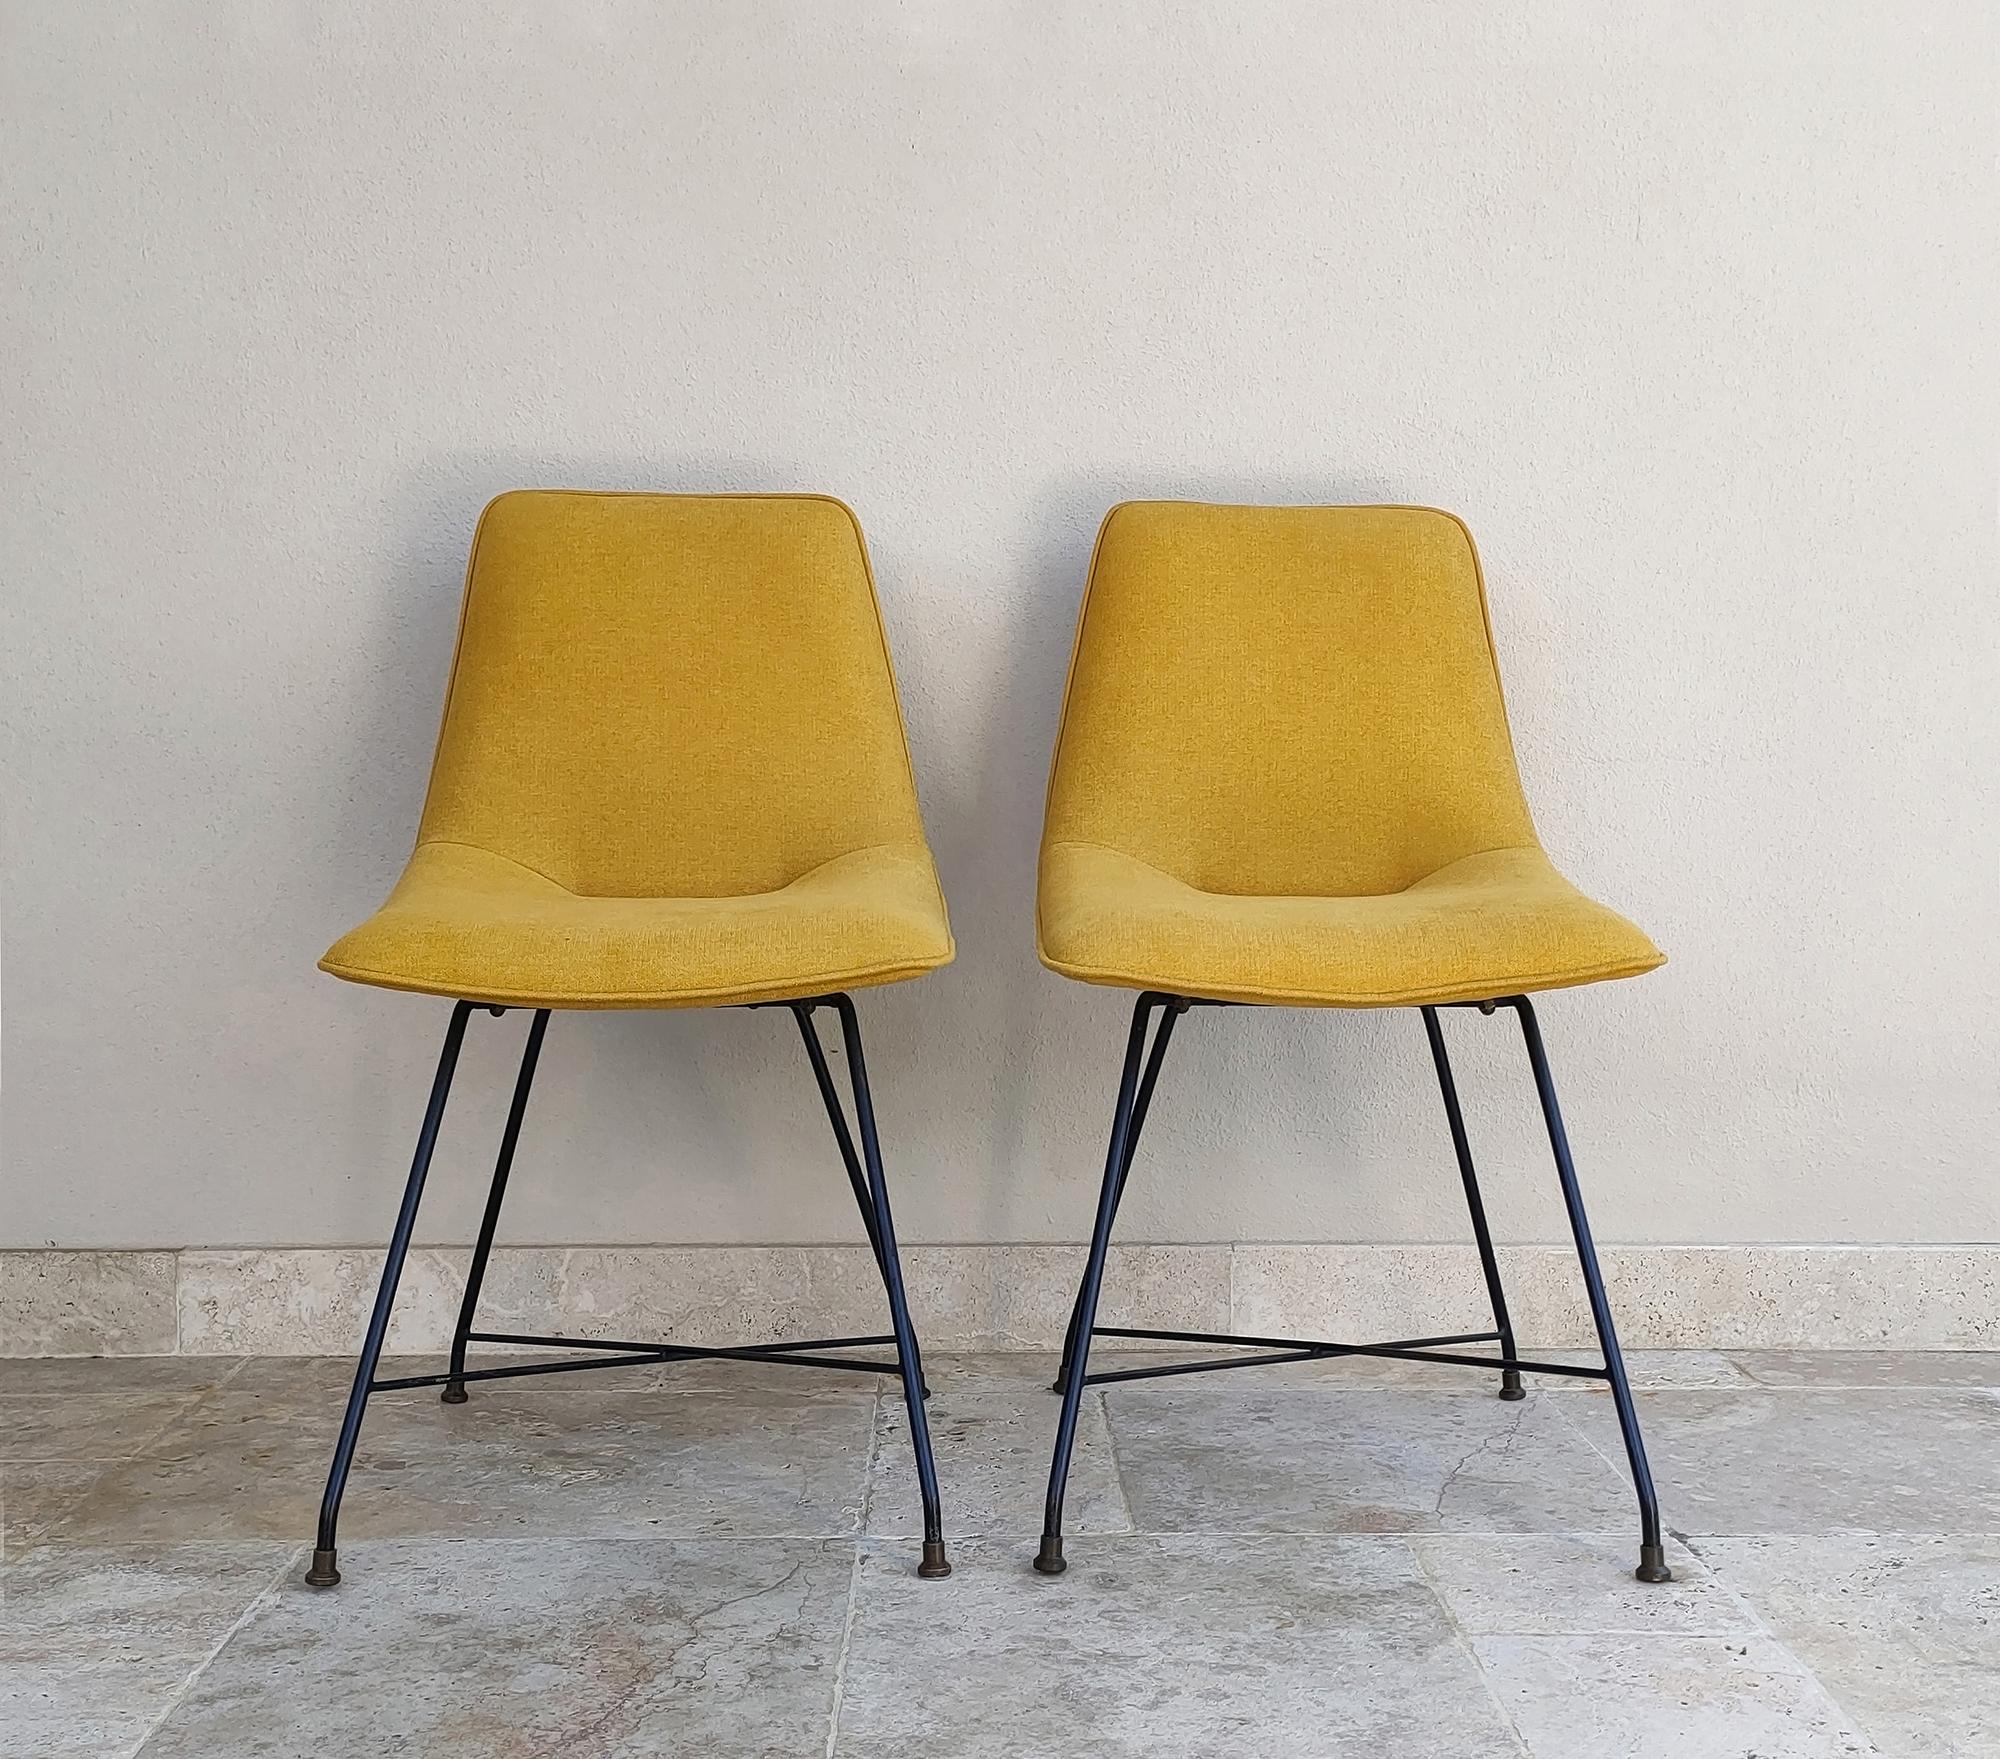 Set of two Aster chairs designed by Augusto Bozzi in the 1950s and manufactured by Fratelli Saporiti.
The main feature of chairs is the iconic and elegant metal structure of the legs, typical of the Augusto Bozzi’s design.
The chairs seats are